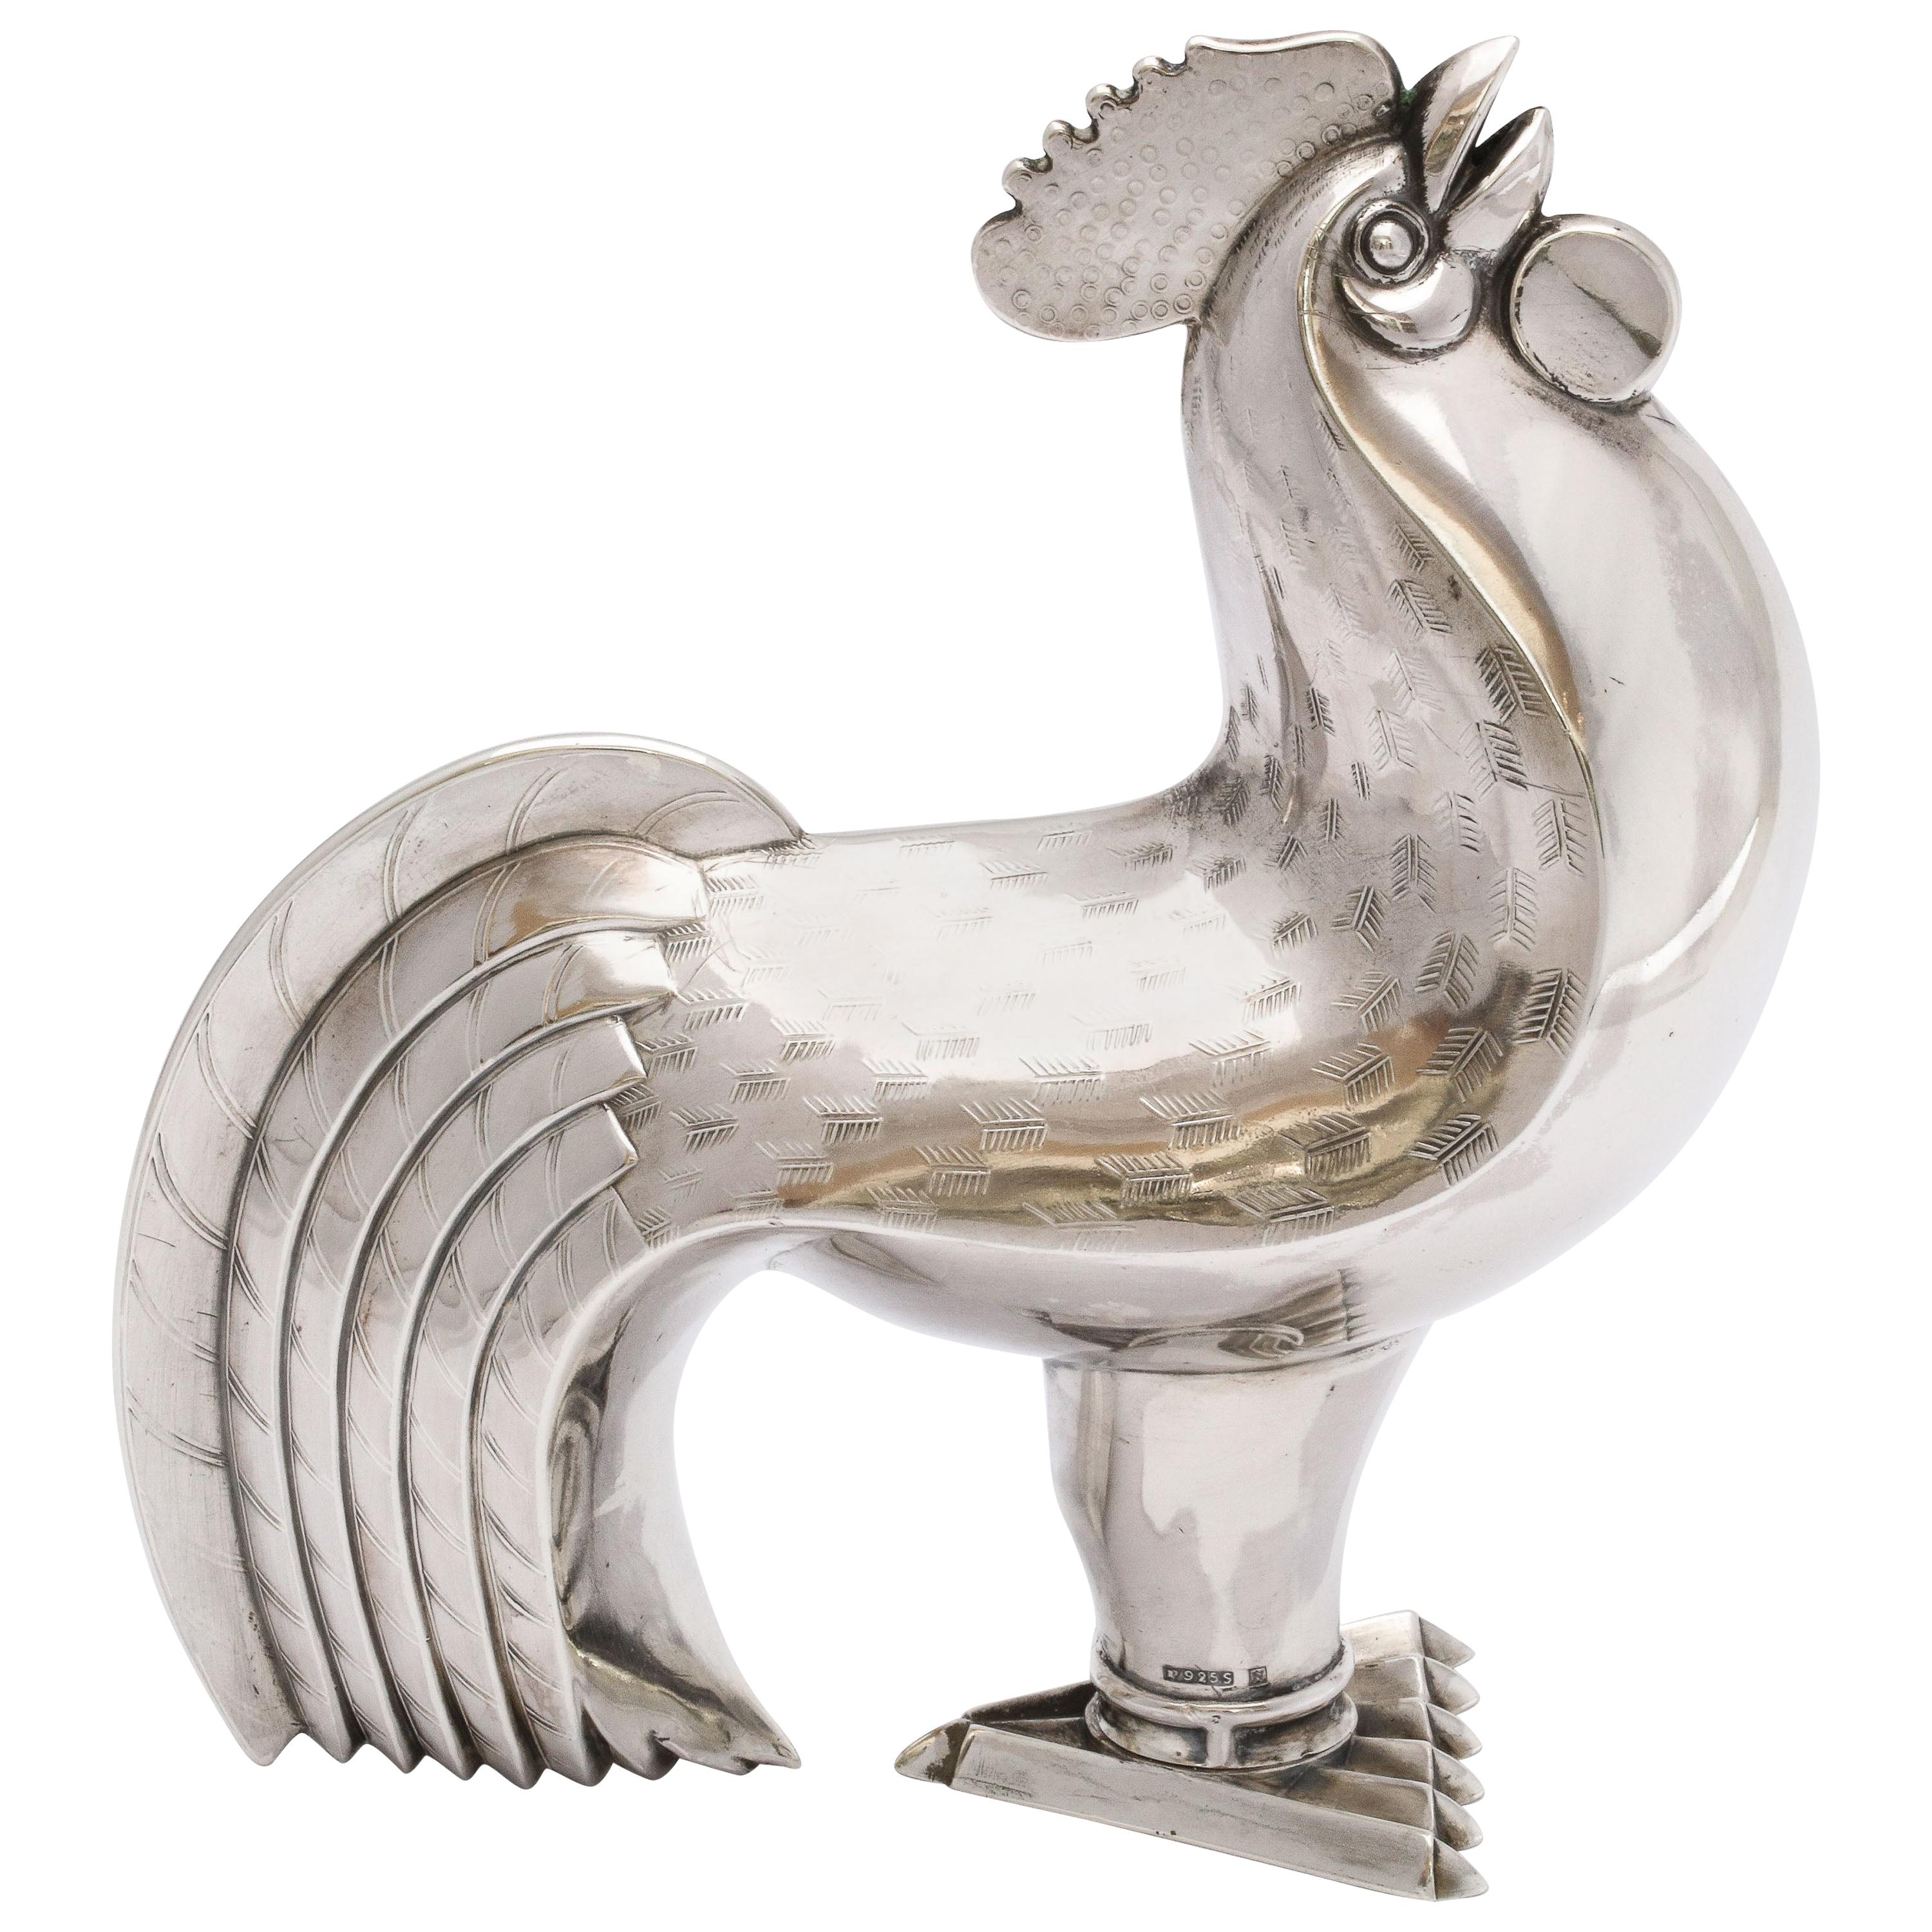 Art Deco Norwegian Sterling Silver Rooster-Form Sugar Caster by Tostrup